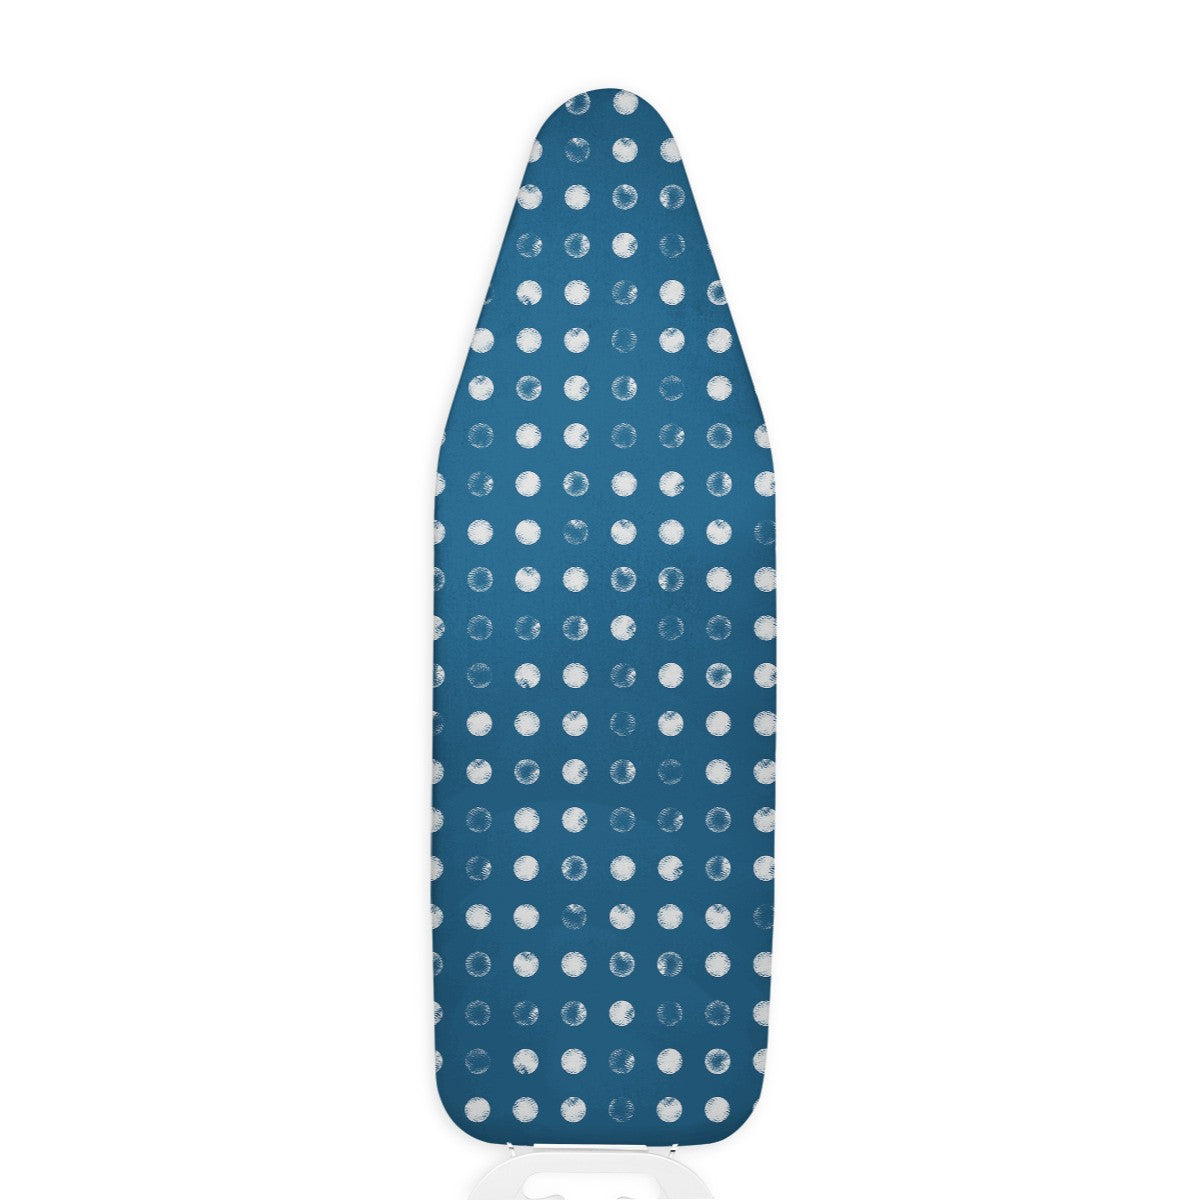 Combination Ironing Board Cover and 100 percent WOOL IRONING PAD, choose  from any of the fabrics in my shop